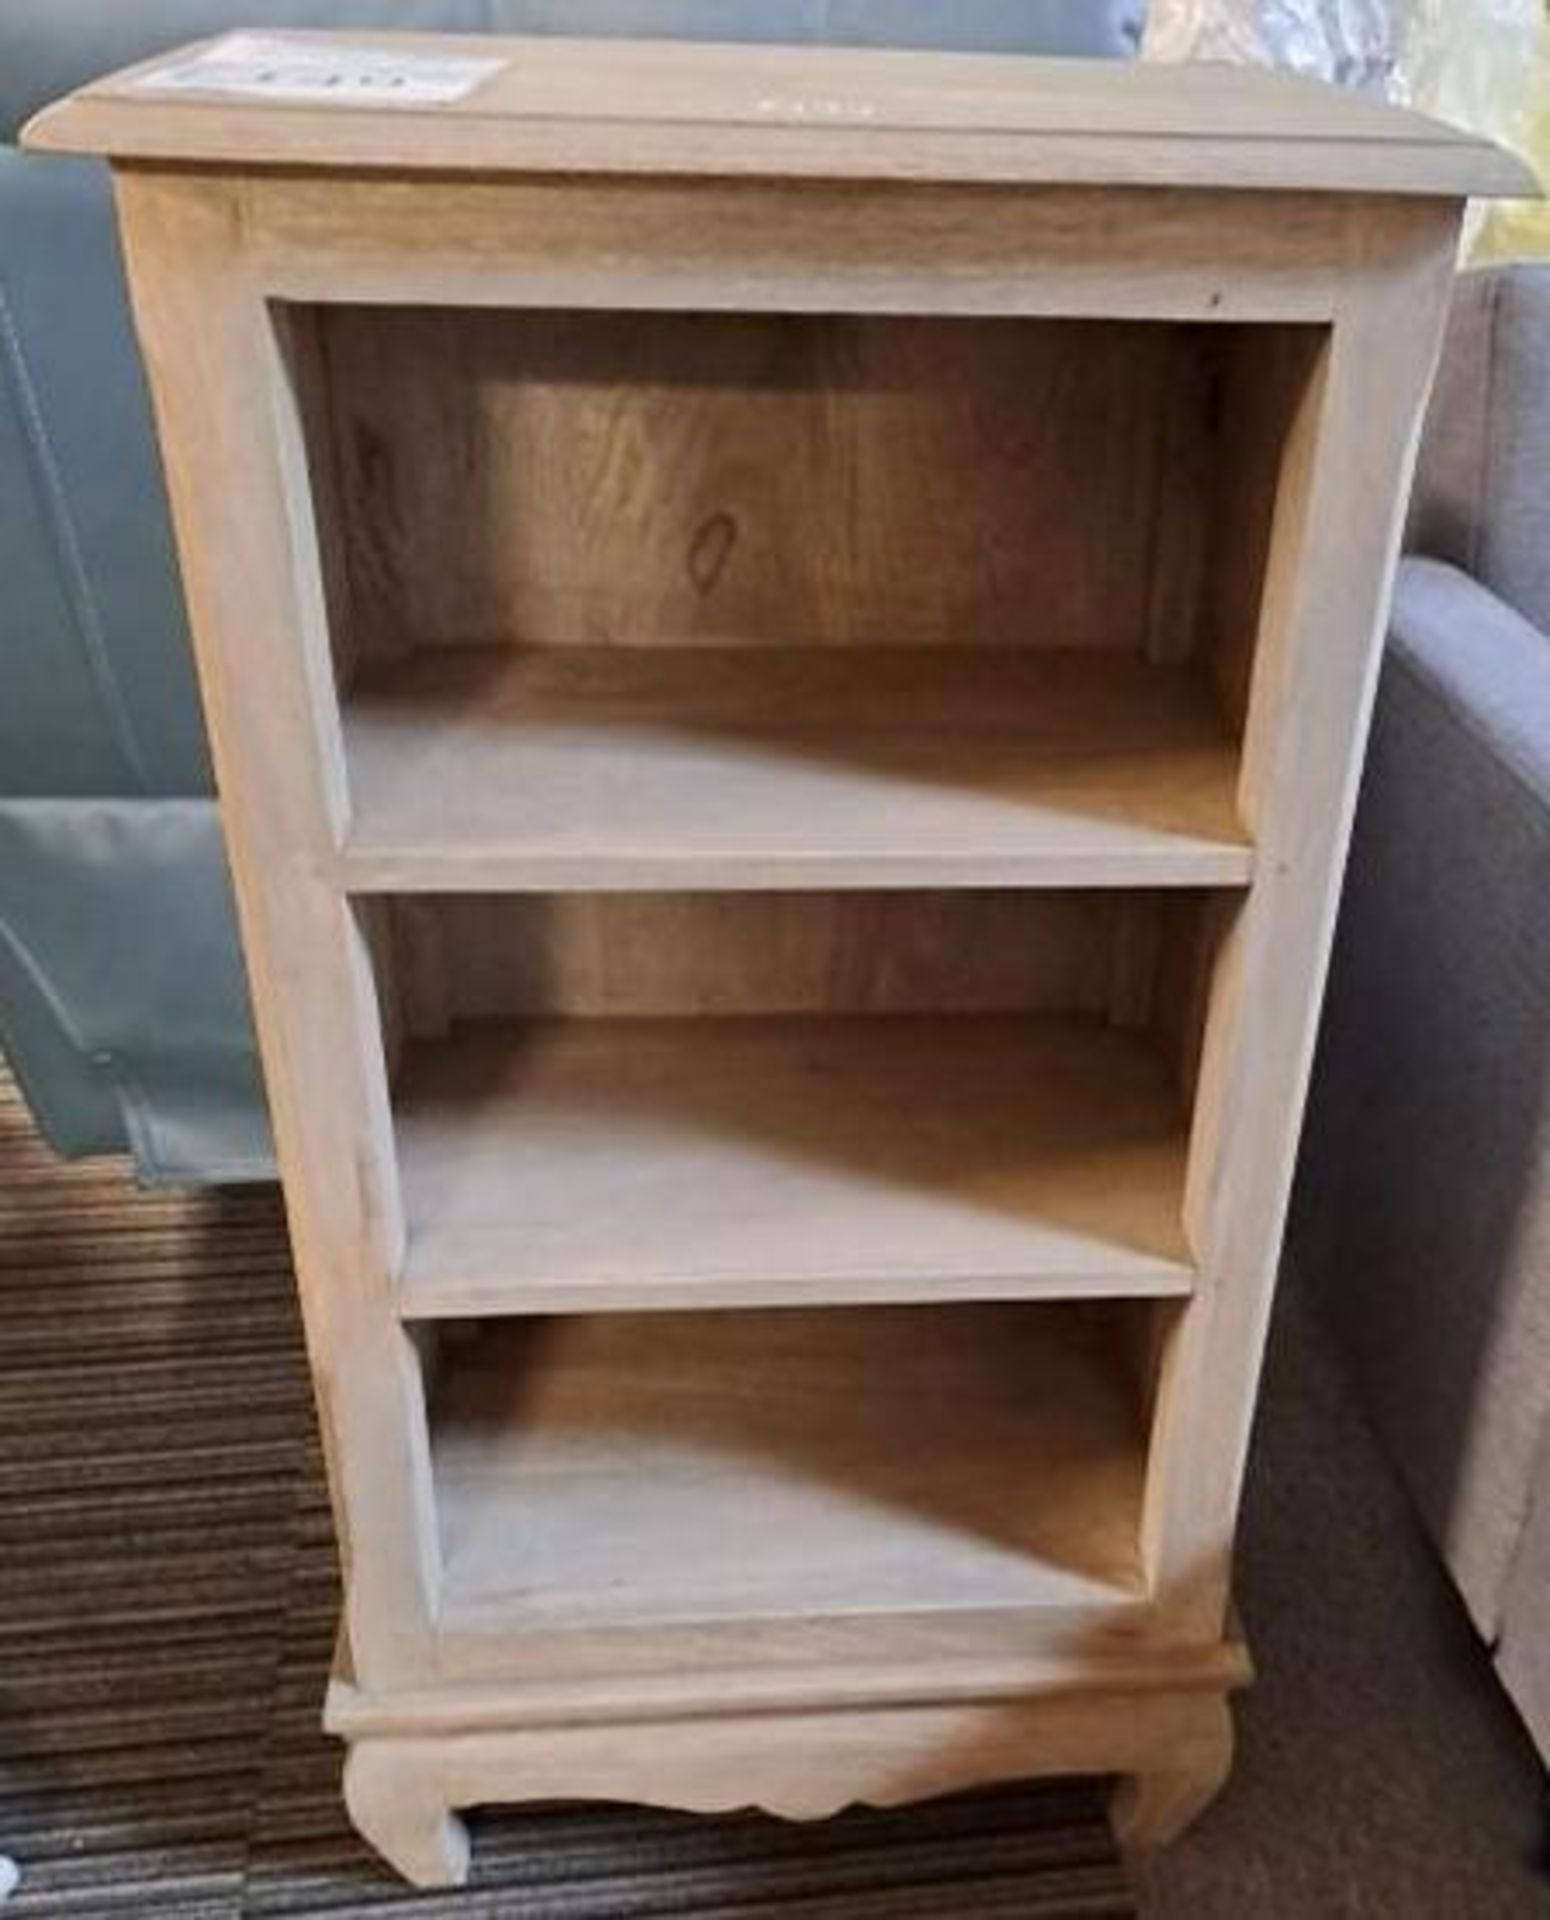 *EX DISPLAY* IFD Country oak open book case unit.